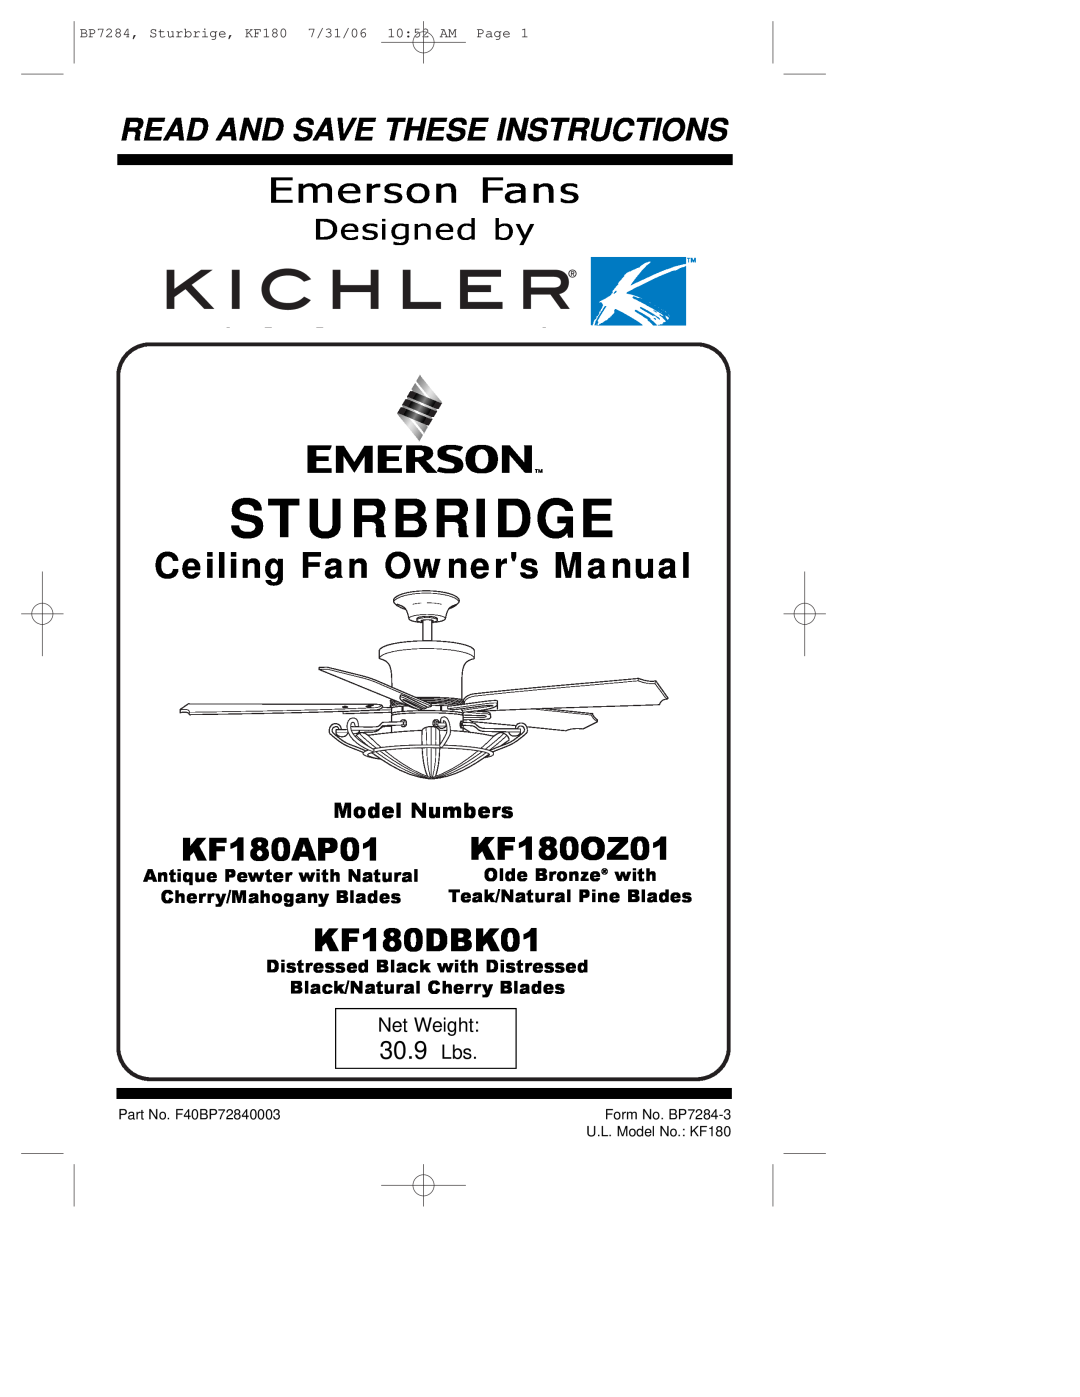 Emerson owner manual Sturbridge, Emerson Fans, KF180AP01, KF180OZ01, KF180DBK01, Read And Save These Instructions 